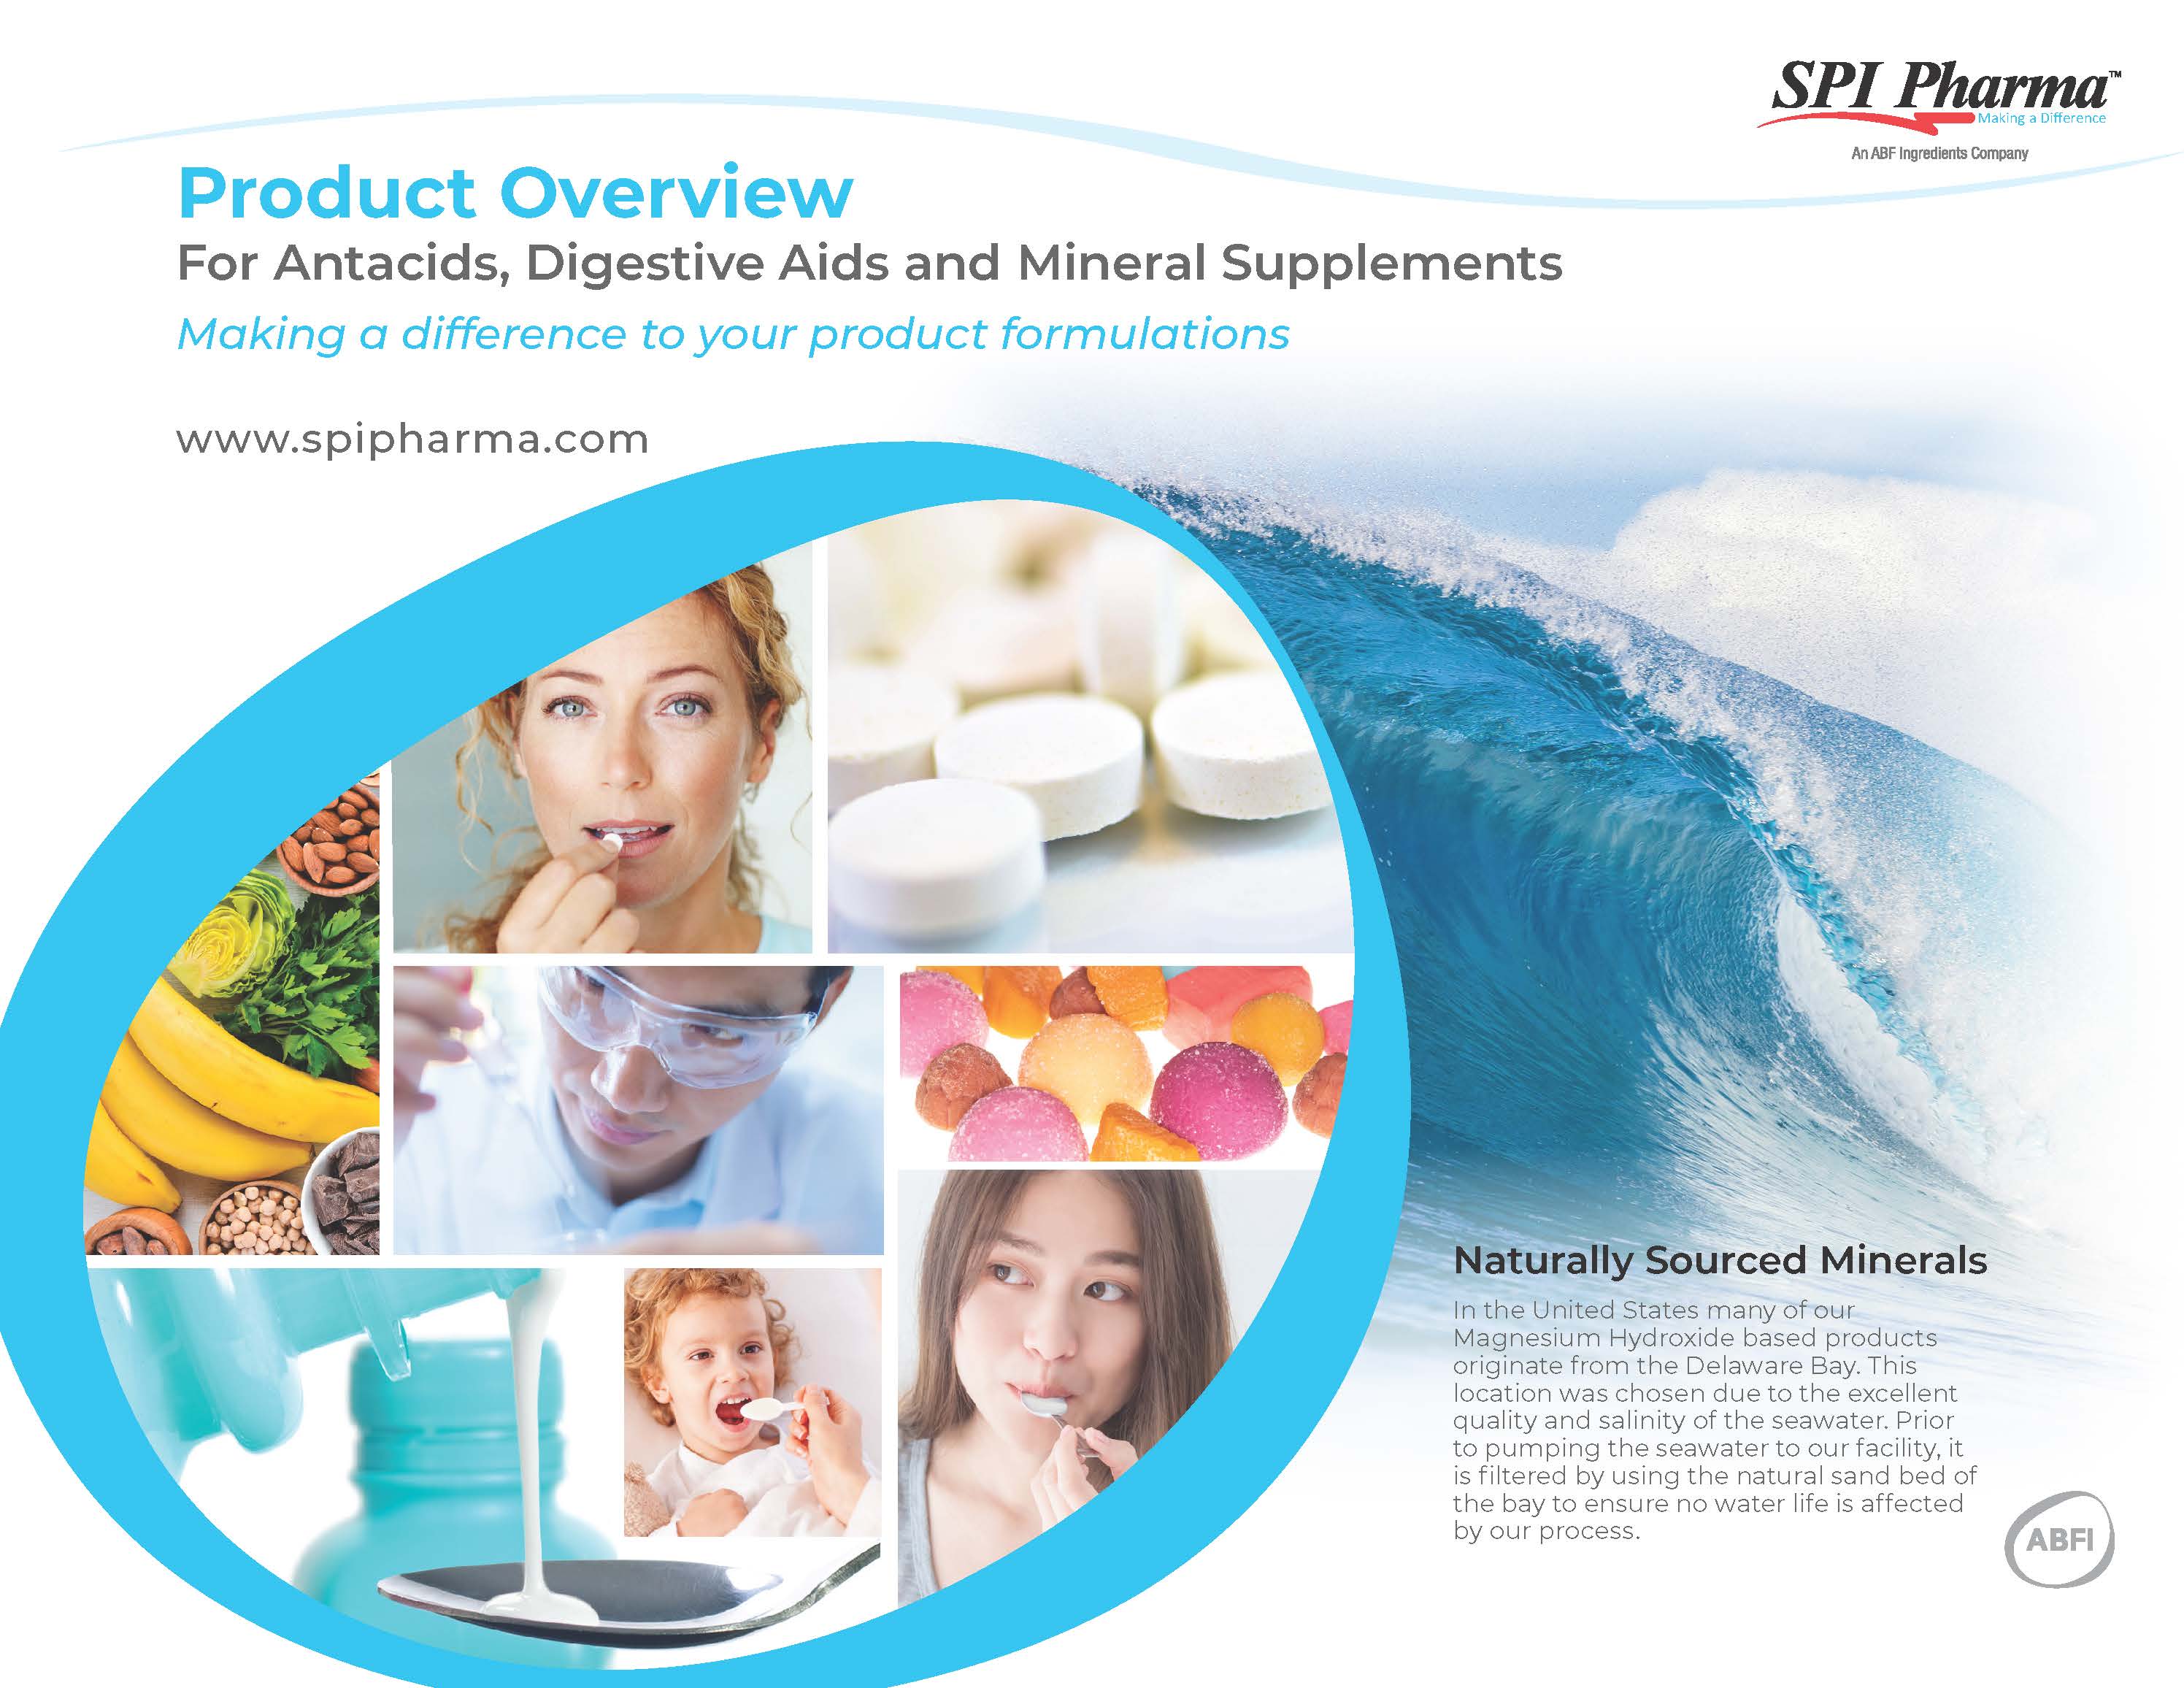 Product Overview For Antacids, Digestive Aids and Mineral Supplements